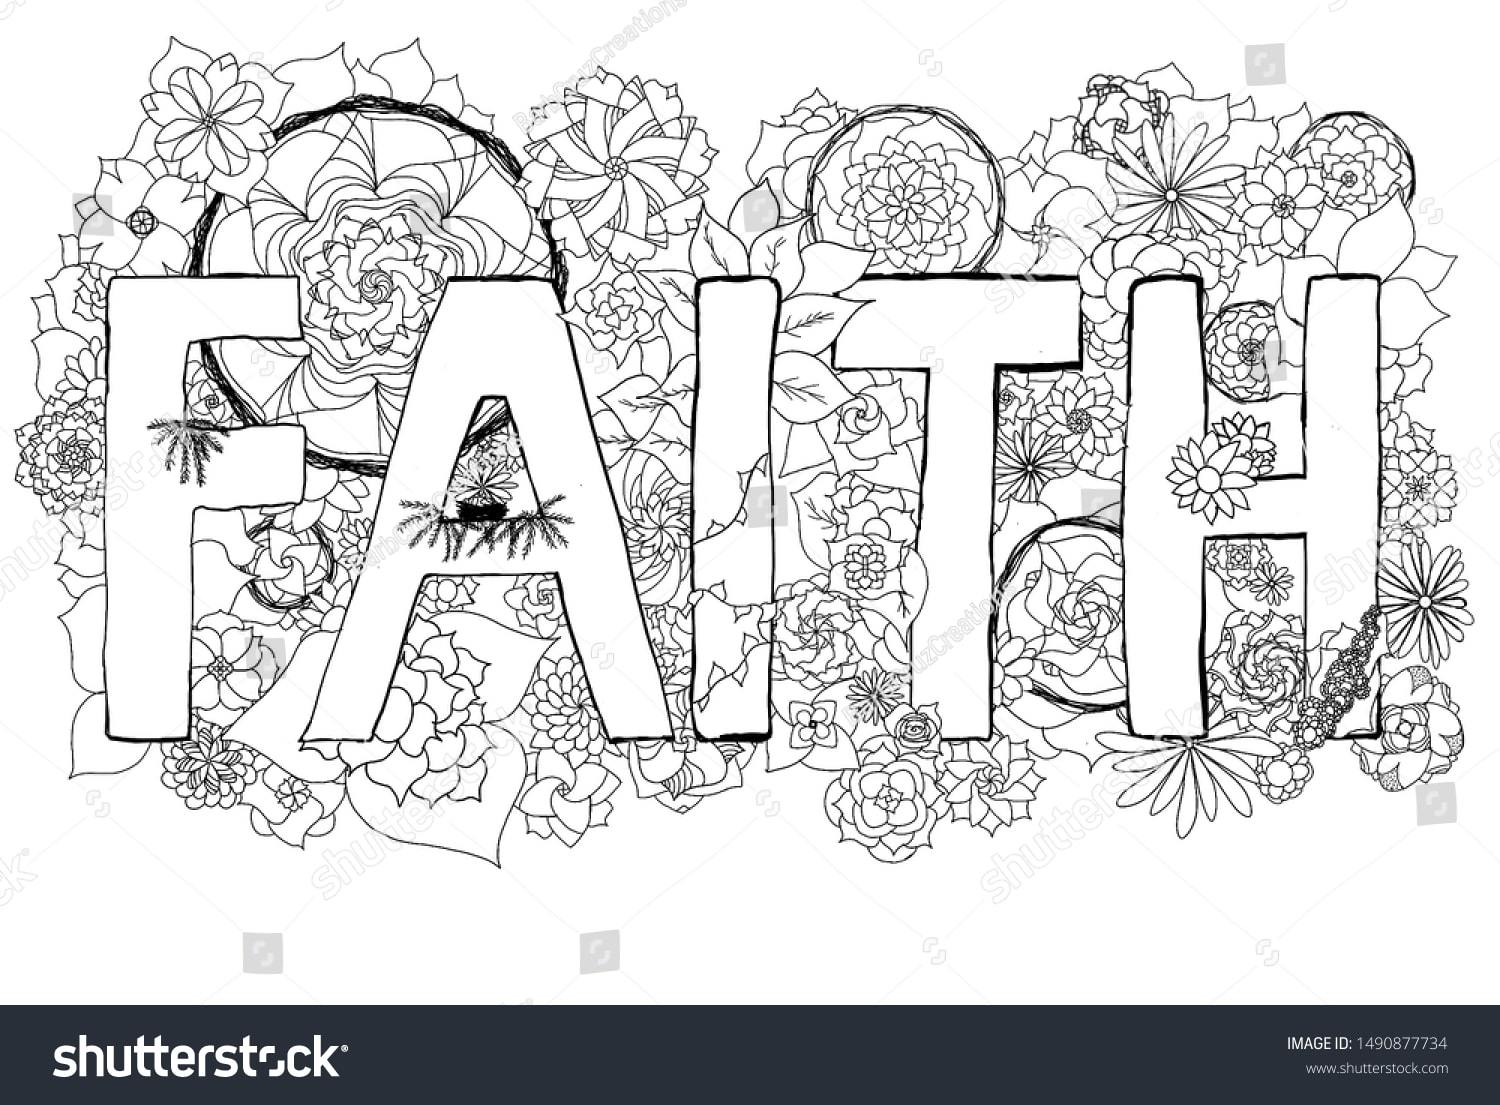 20 Faith Coloring Pages for Adults   Happier Human